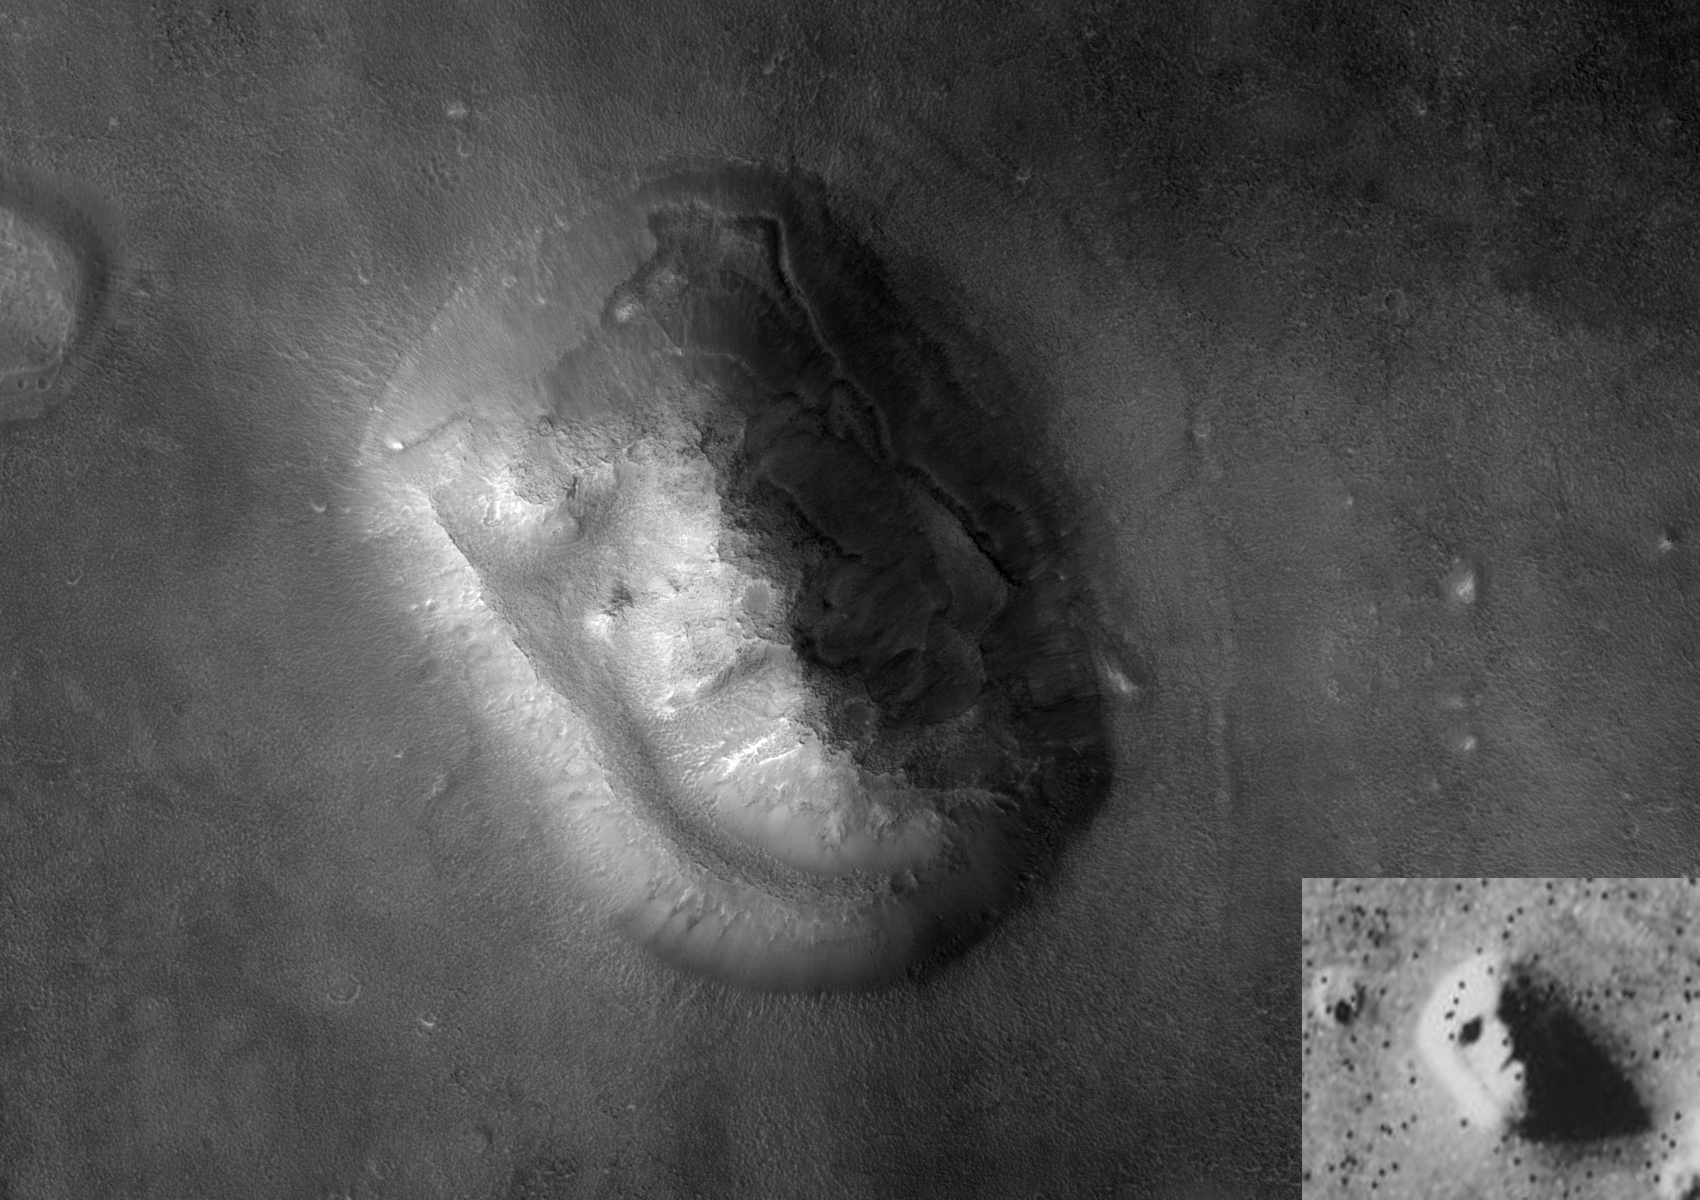 Image of the "Face of Mars" by the Mars Reconnaissance Orbiter, with the Viking 1 image inset (bottom right). Credit: NASA/JPL